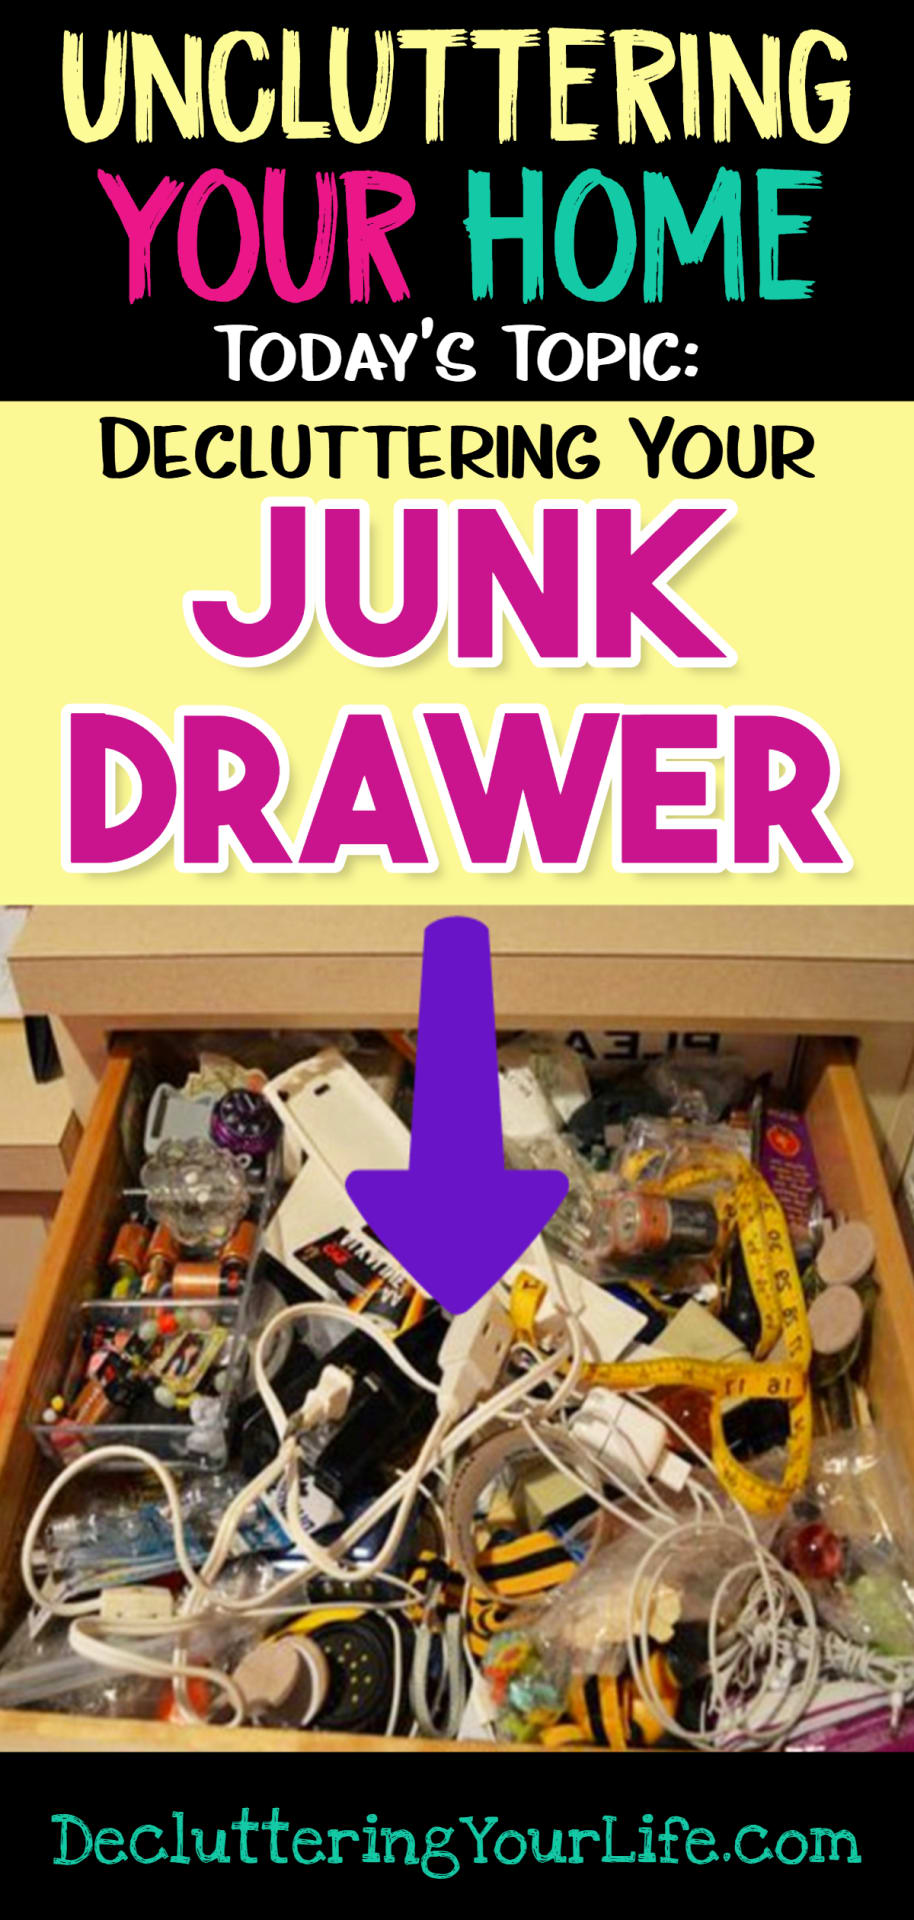 Uncluttering Your Home - today's topic: Junk Drawer Organizing. How to organize your junk drawer and eliminate junk drawer clutter